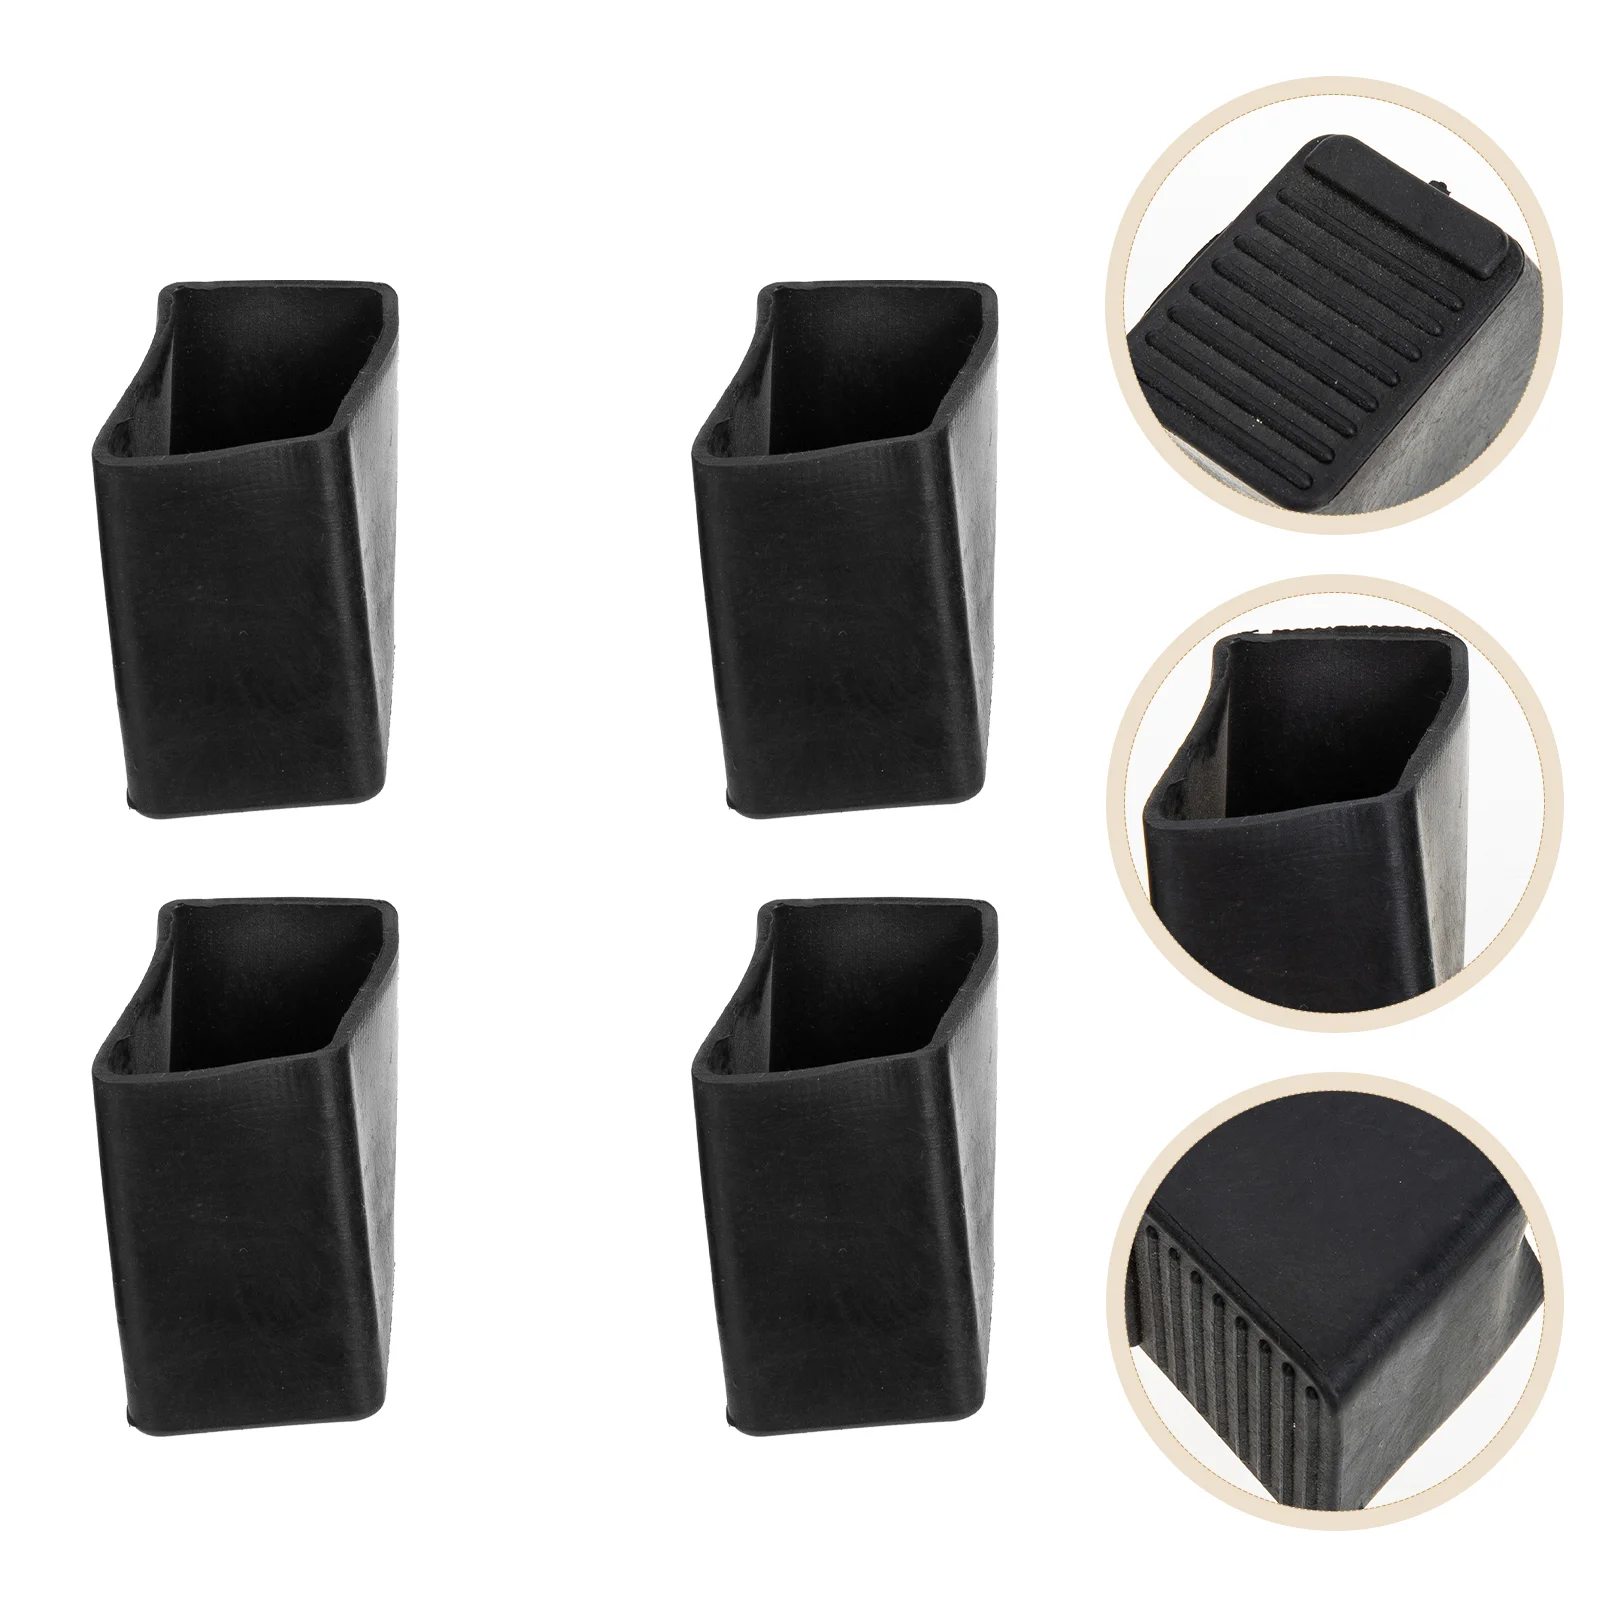 

4 Pcs Ladder Foot Cover Folding Step Non-slip Pad Furniture Legs Engineering Pads Rubber Non-skid Mat Protective